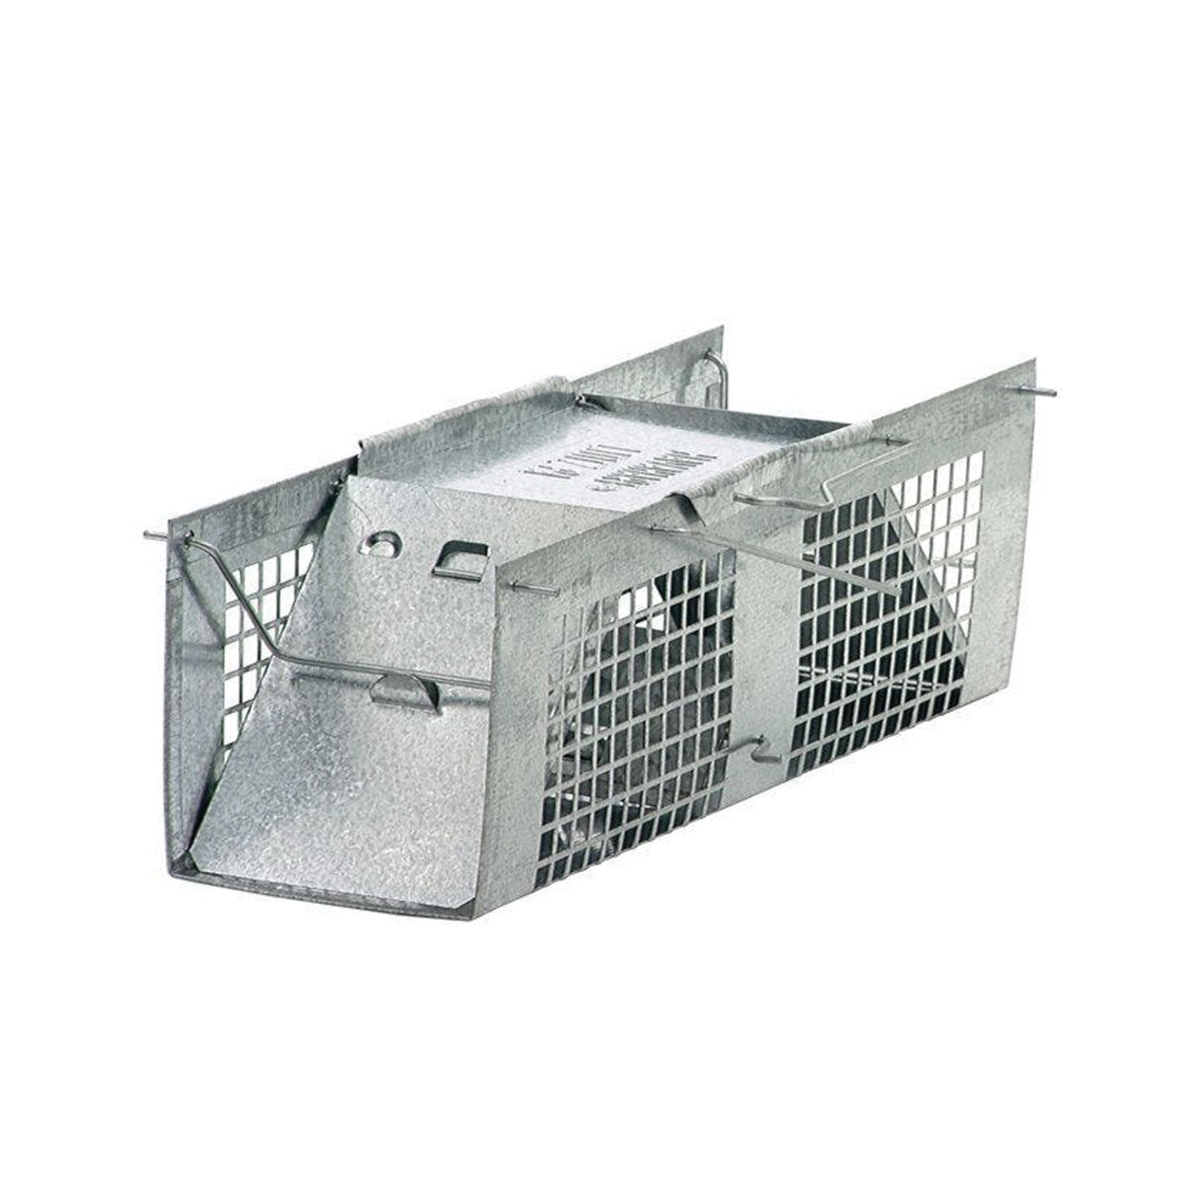 1020 Extra-Small Animal Cage Trap, 10 in L, 3 in W, 3 in H, Gravity-Action, Spring-Loaded Door